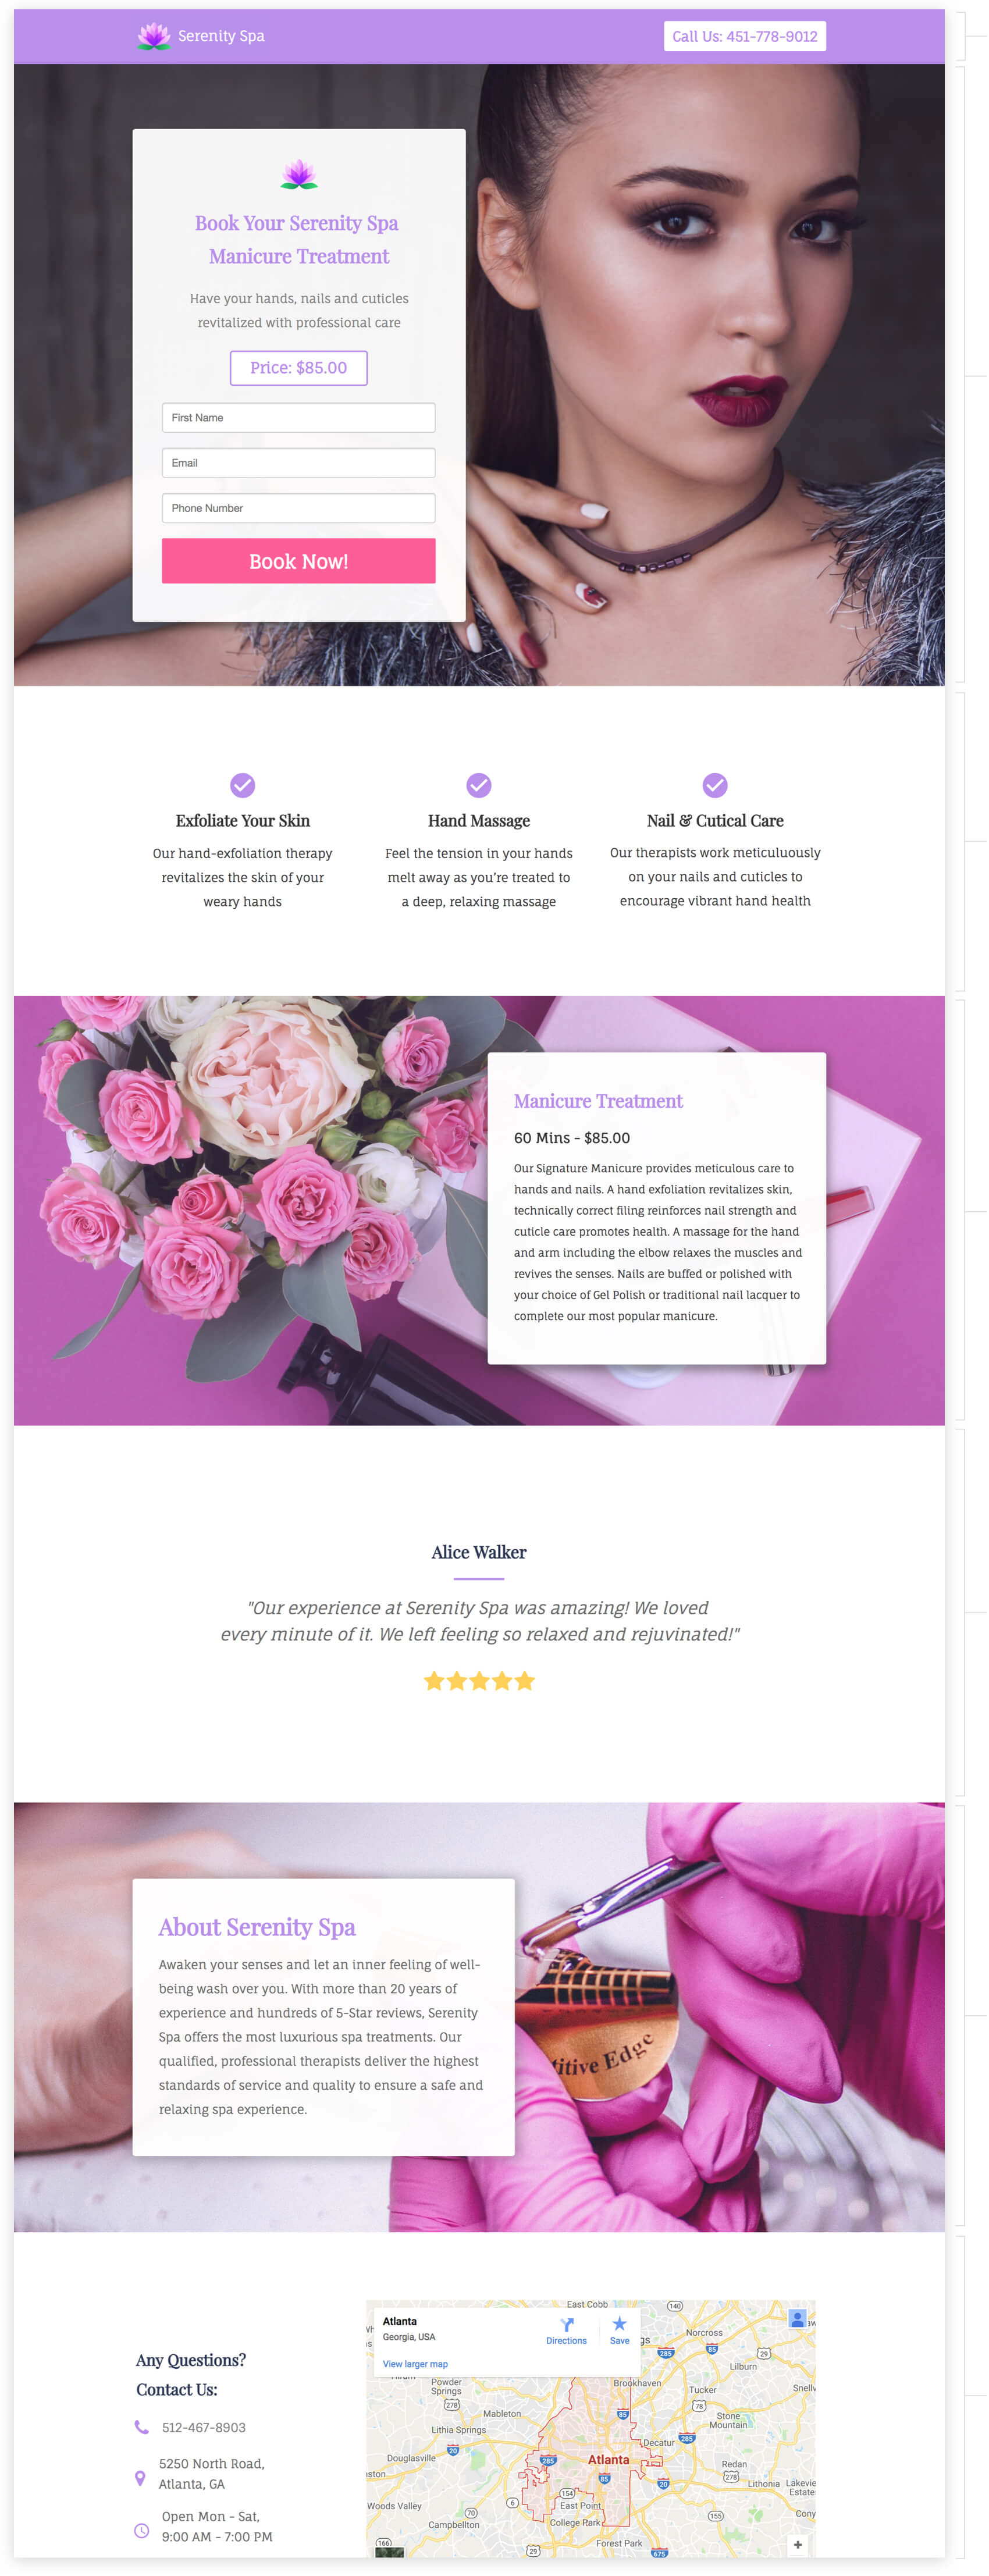 book manicure treatment landing page template